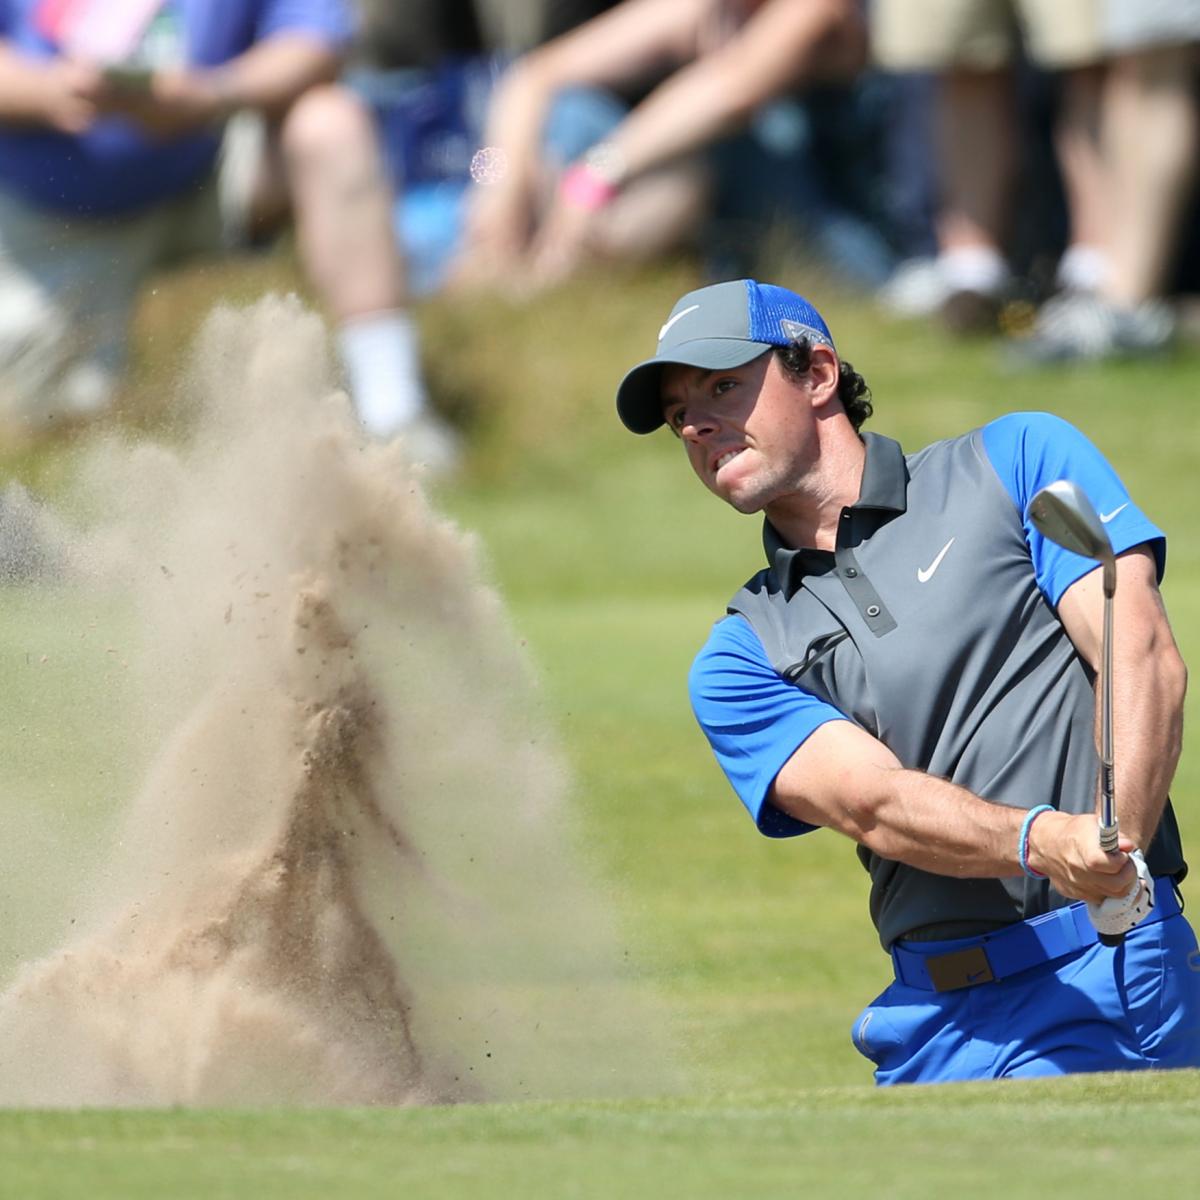 British Open Standings 2014 Live Updated Look at Day 1 Leaderboard